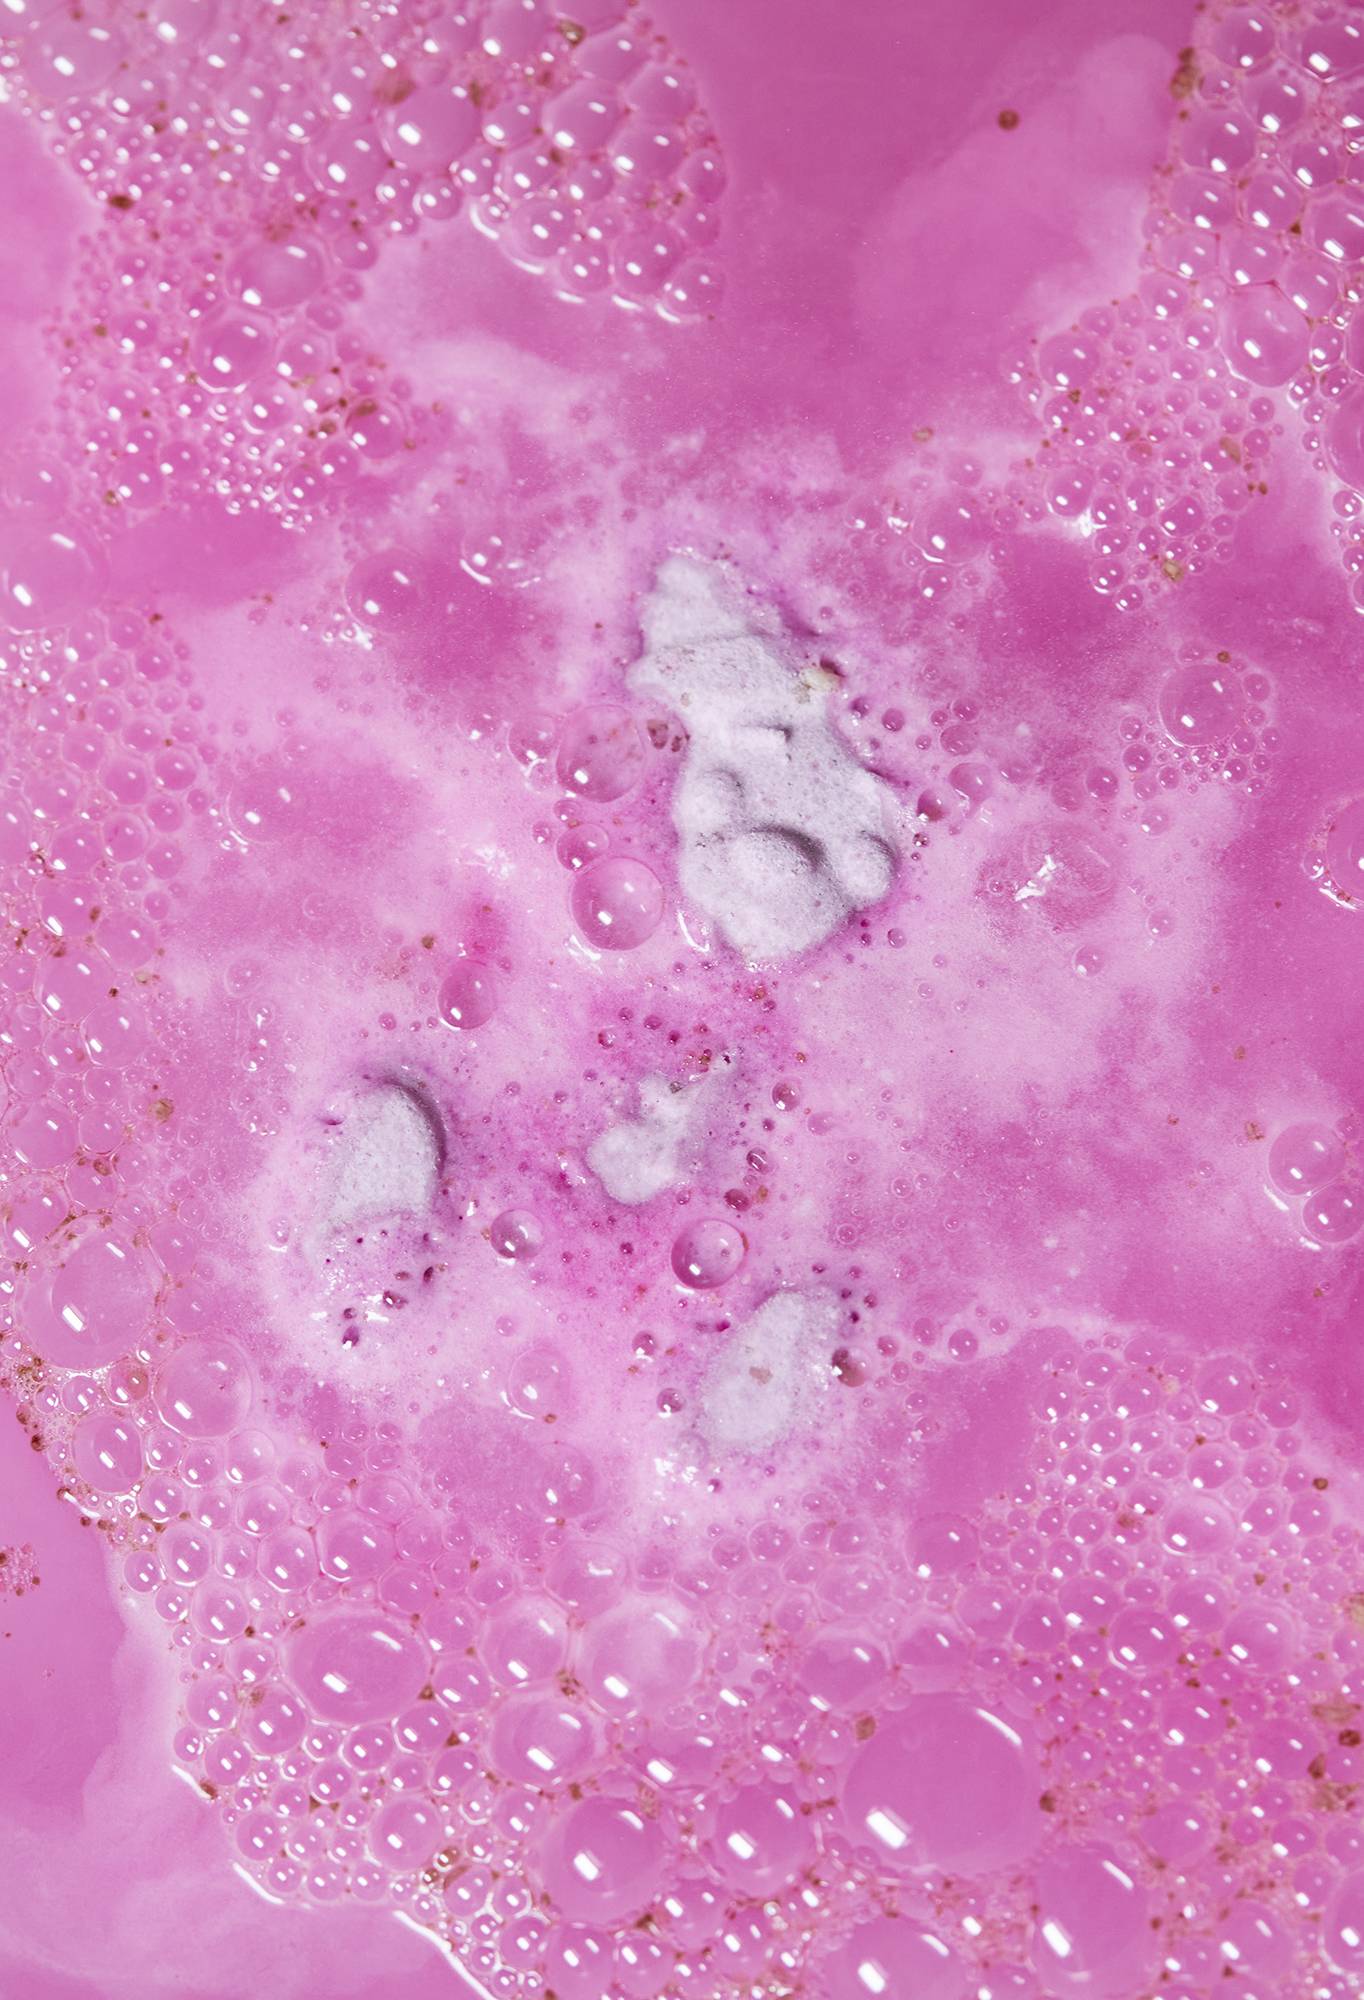 Butterbear bath bomb has nearly fully dissolved leaving deep fuchsia pink water. 